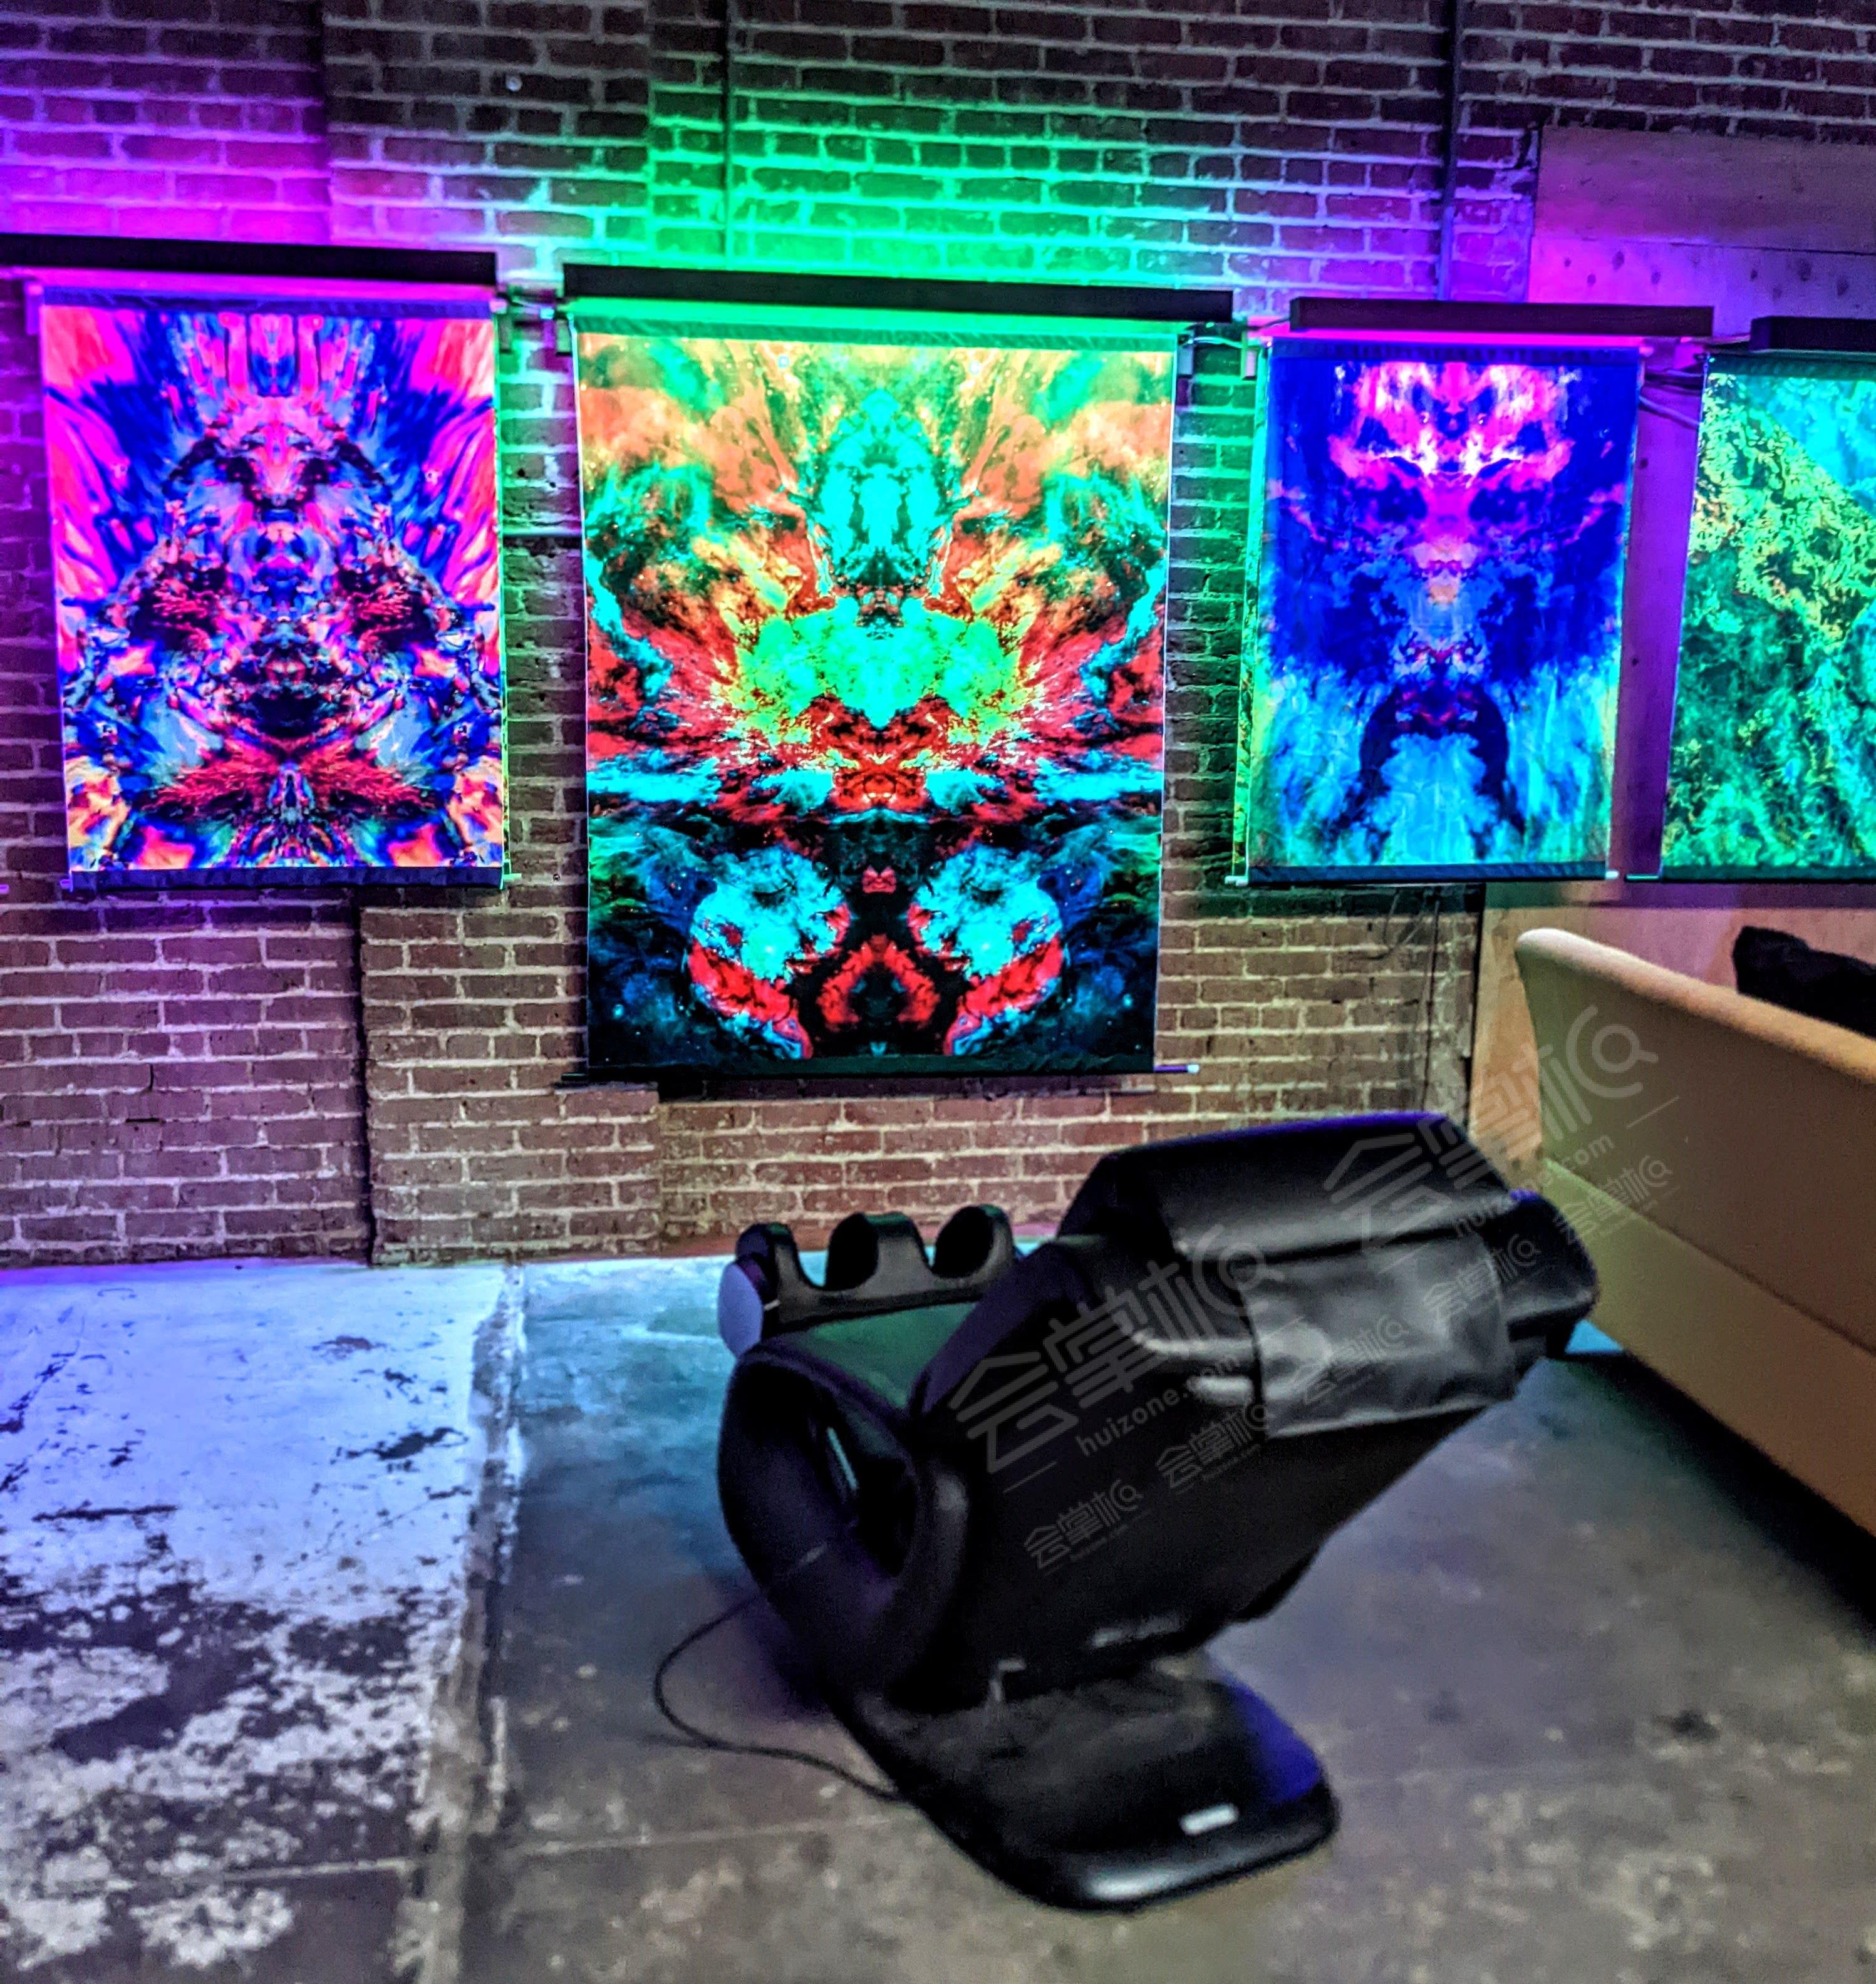 Downtown Immersive Art Gallery.